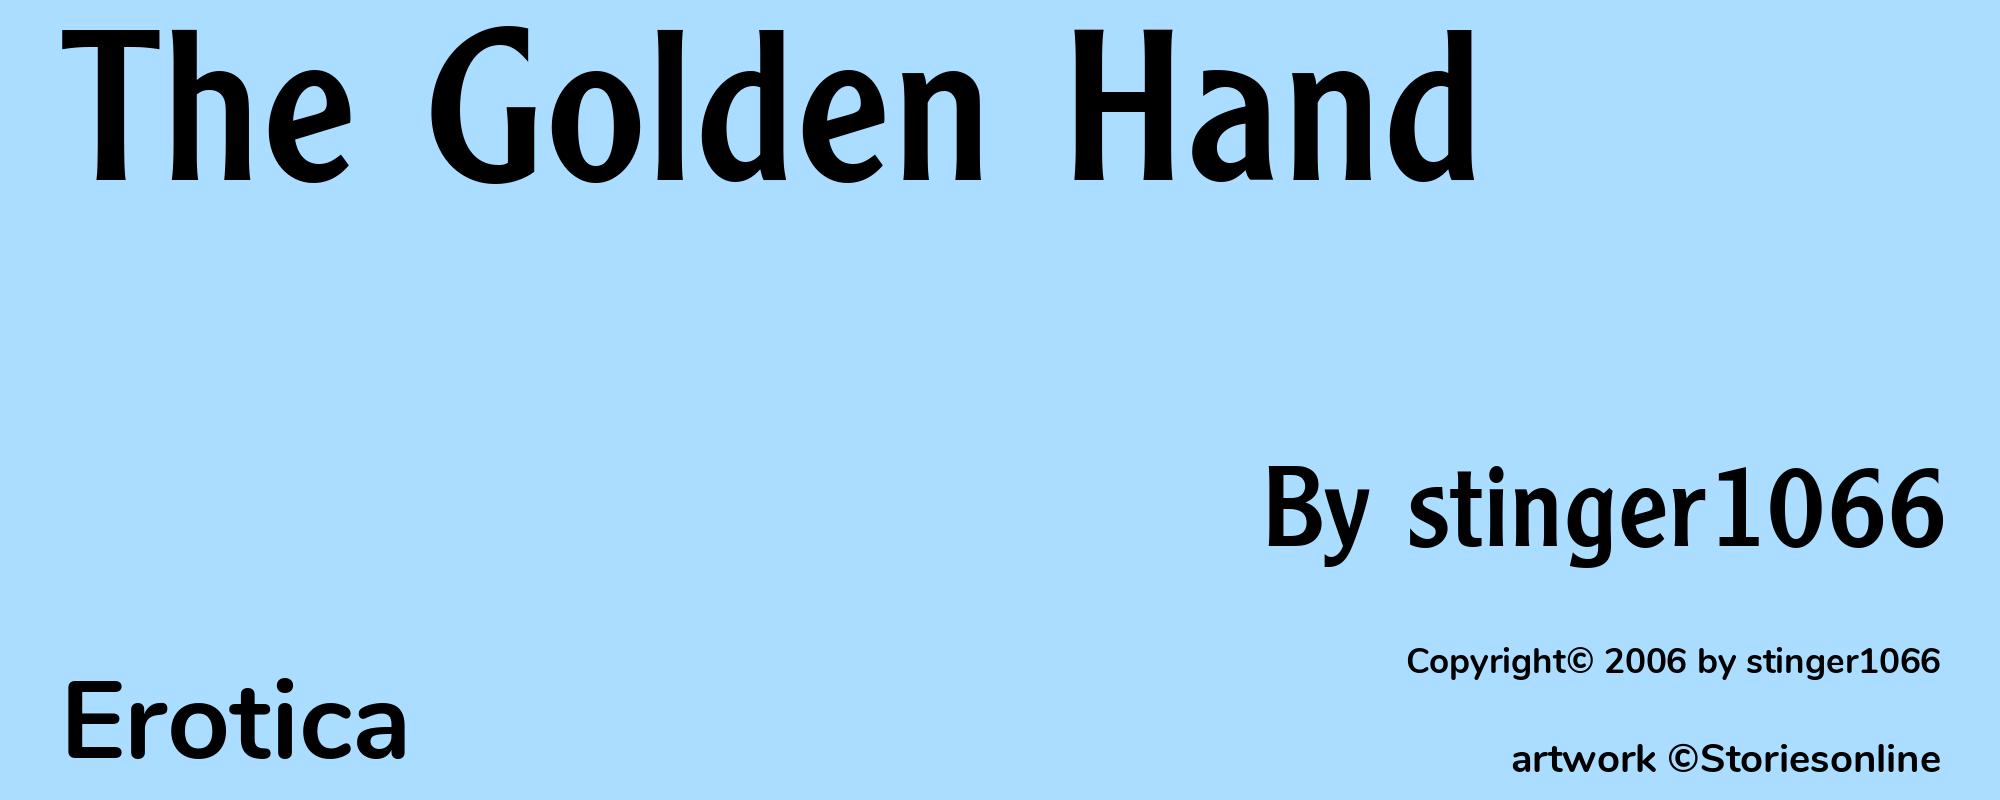 The Golden Hand - Cover